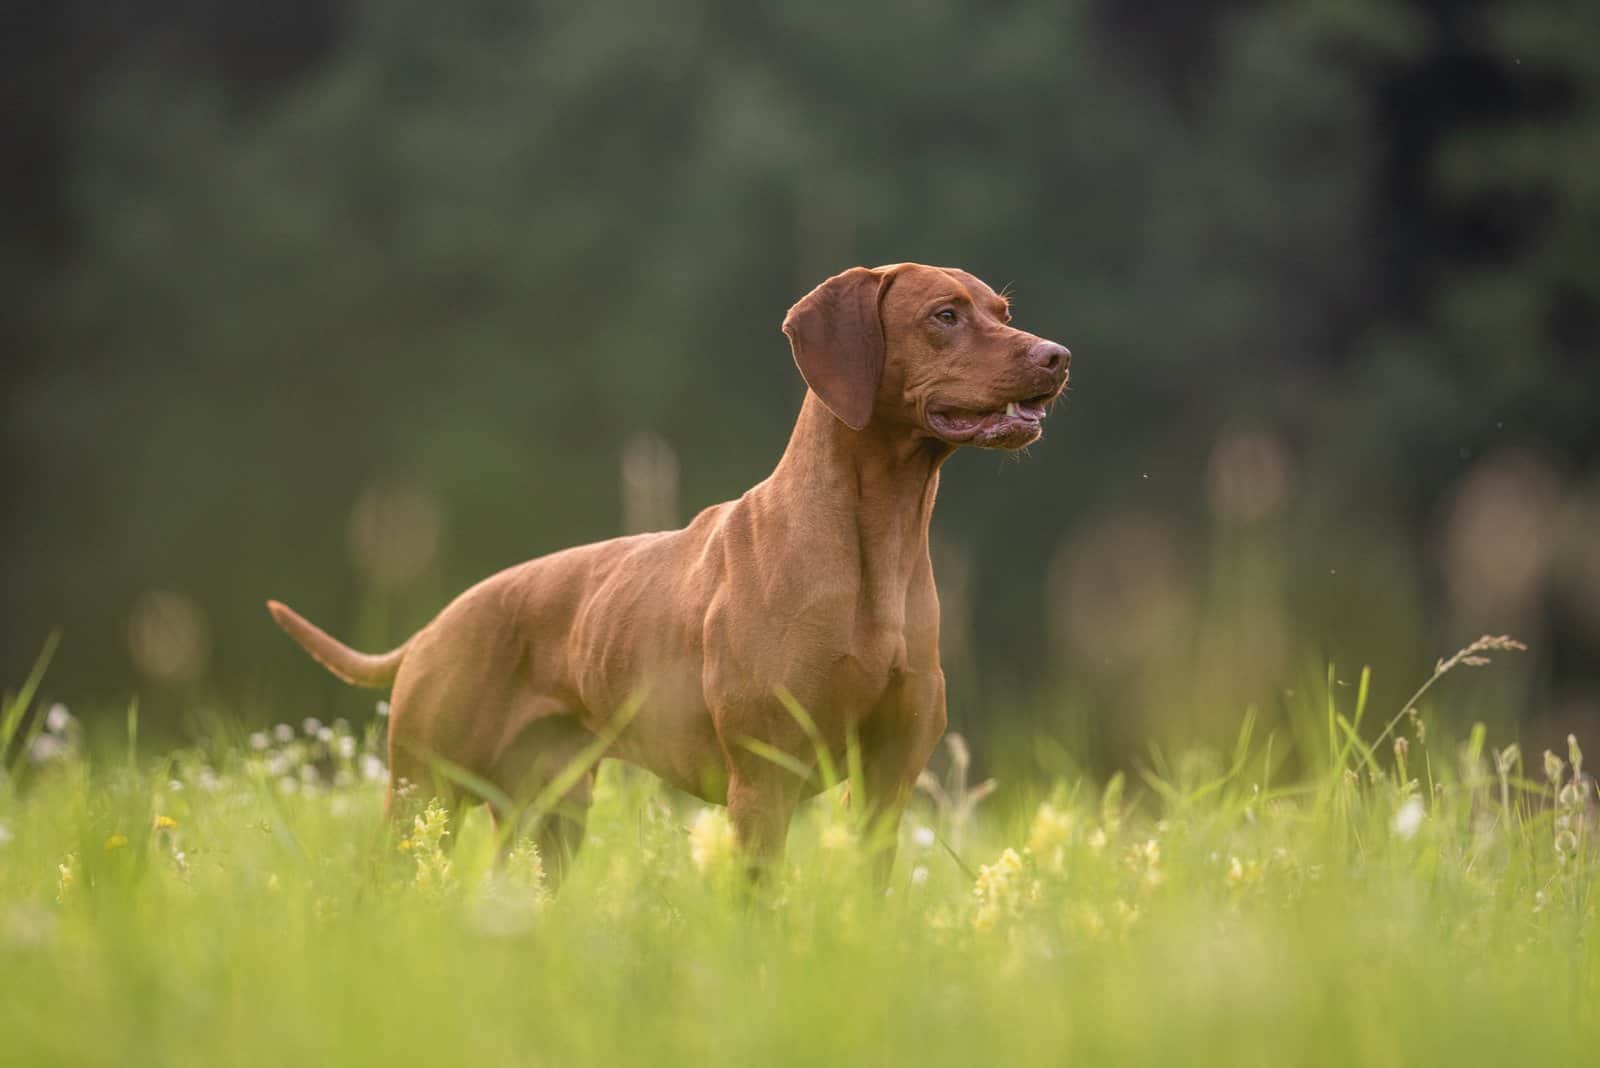 the beautiful Vizsla stands in the grass